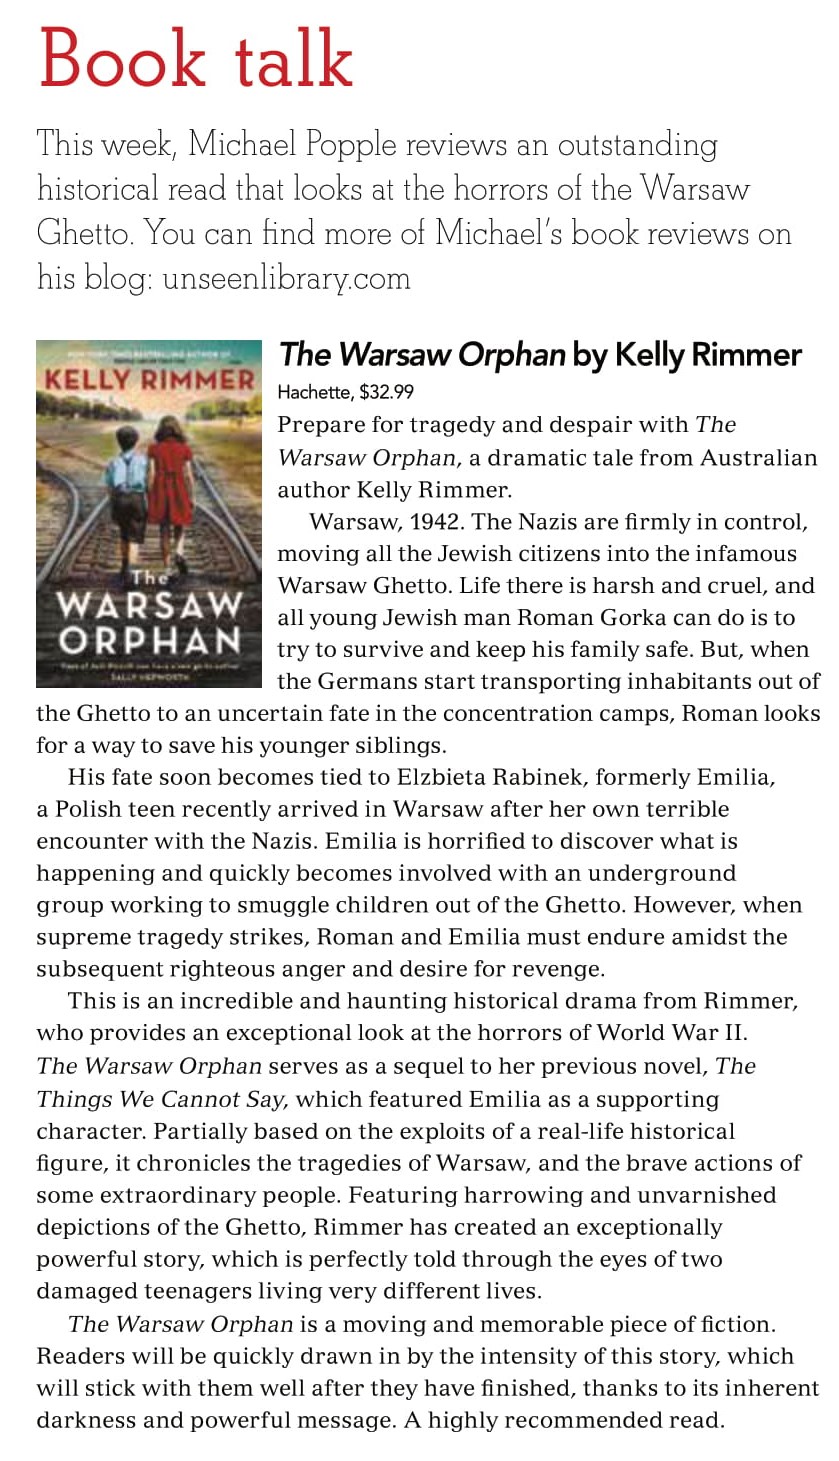 Canberra Weekly Column - The Warsaw Orphan - 13 May 2021-1